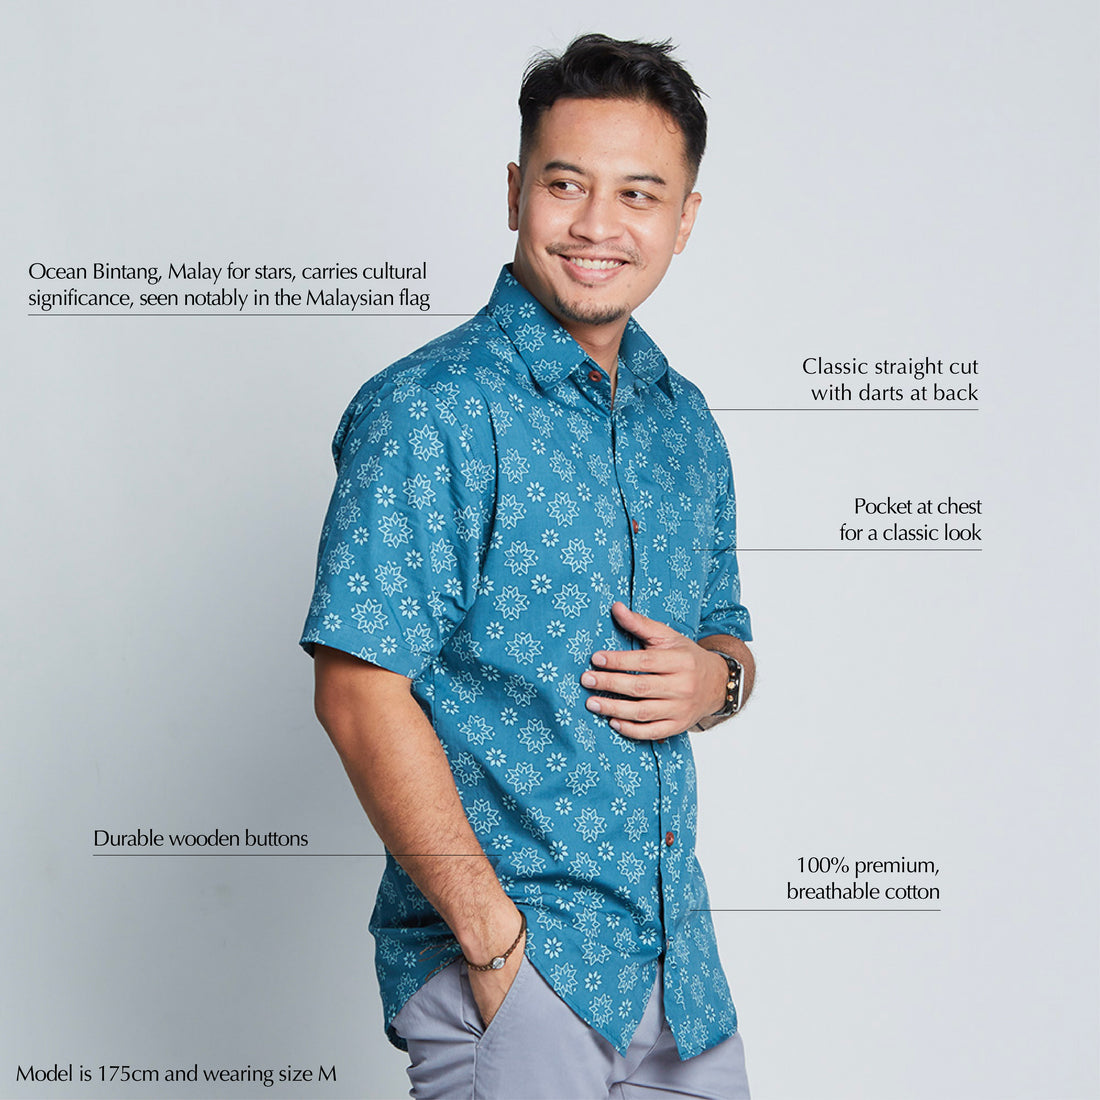 a man standing in front of white background styling batik shirt sleeved in ocean Bintang pattern  